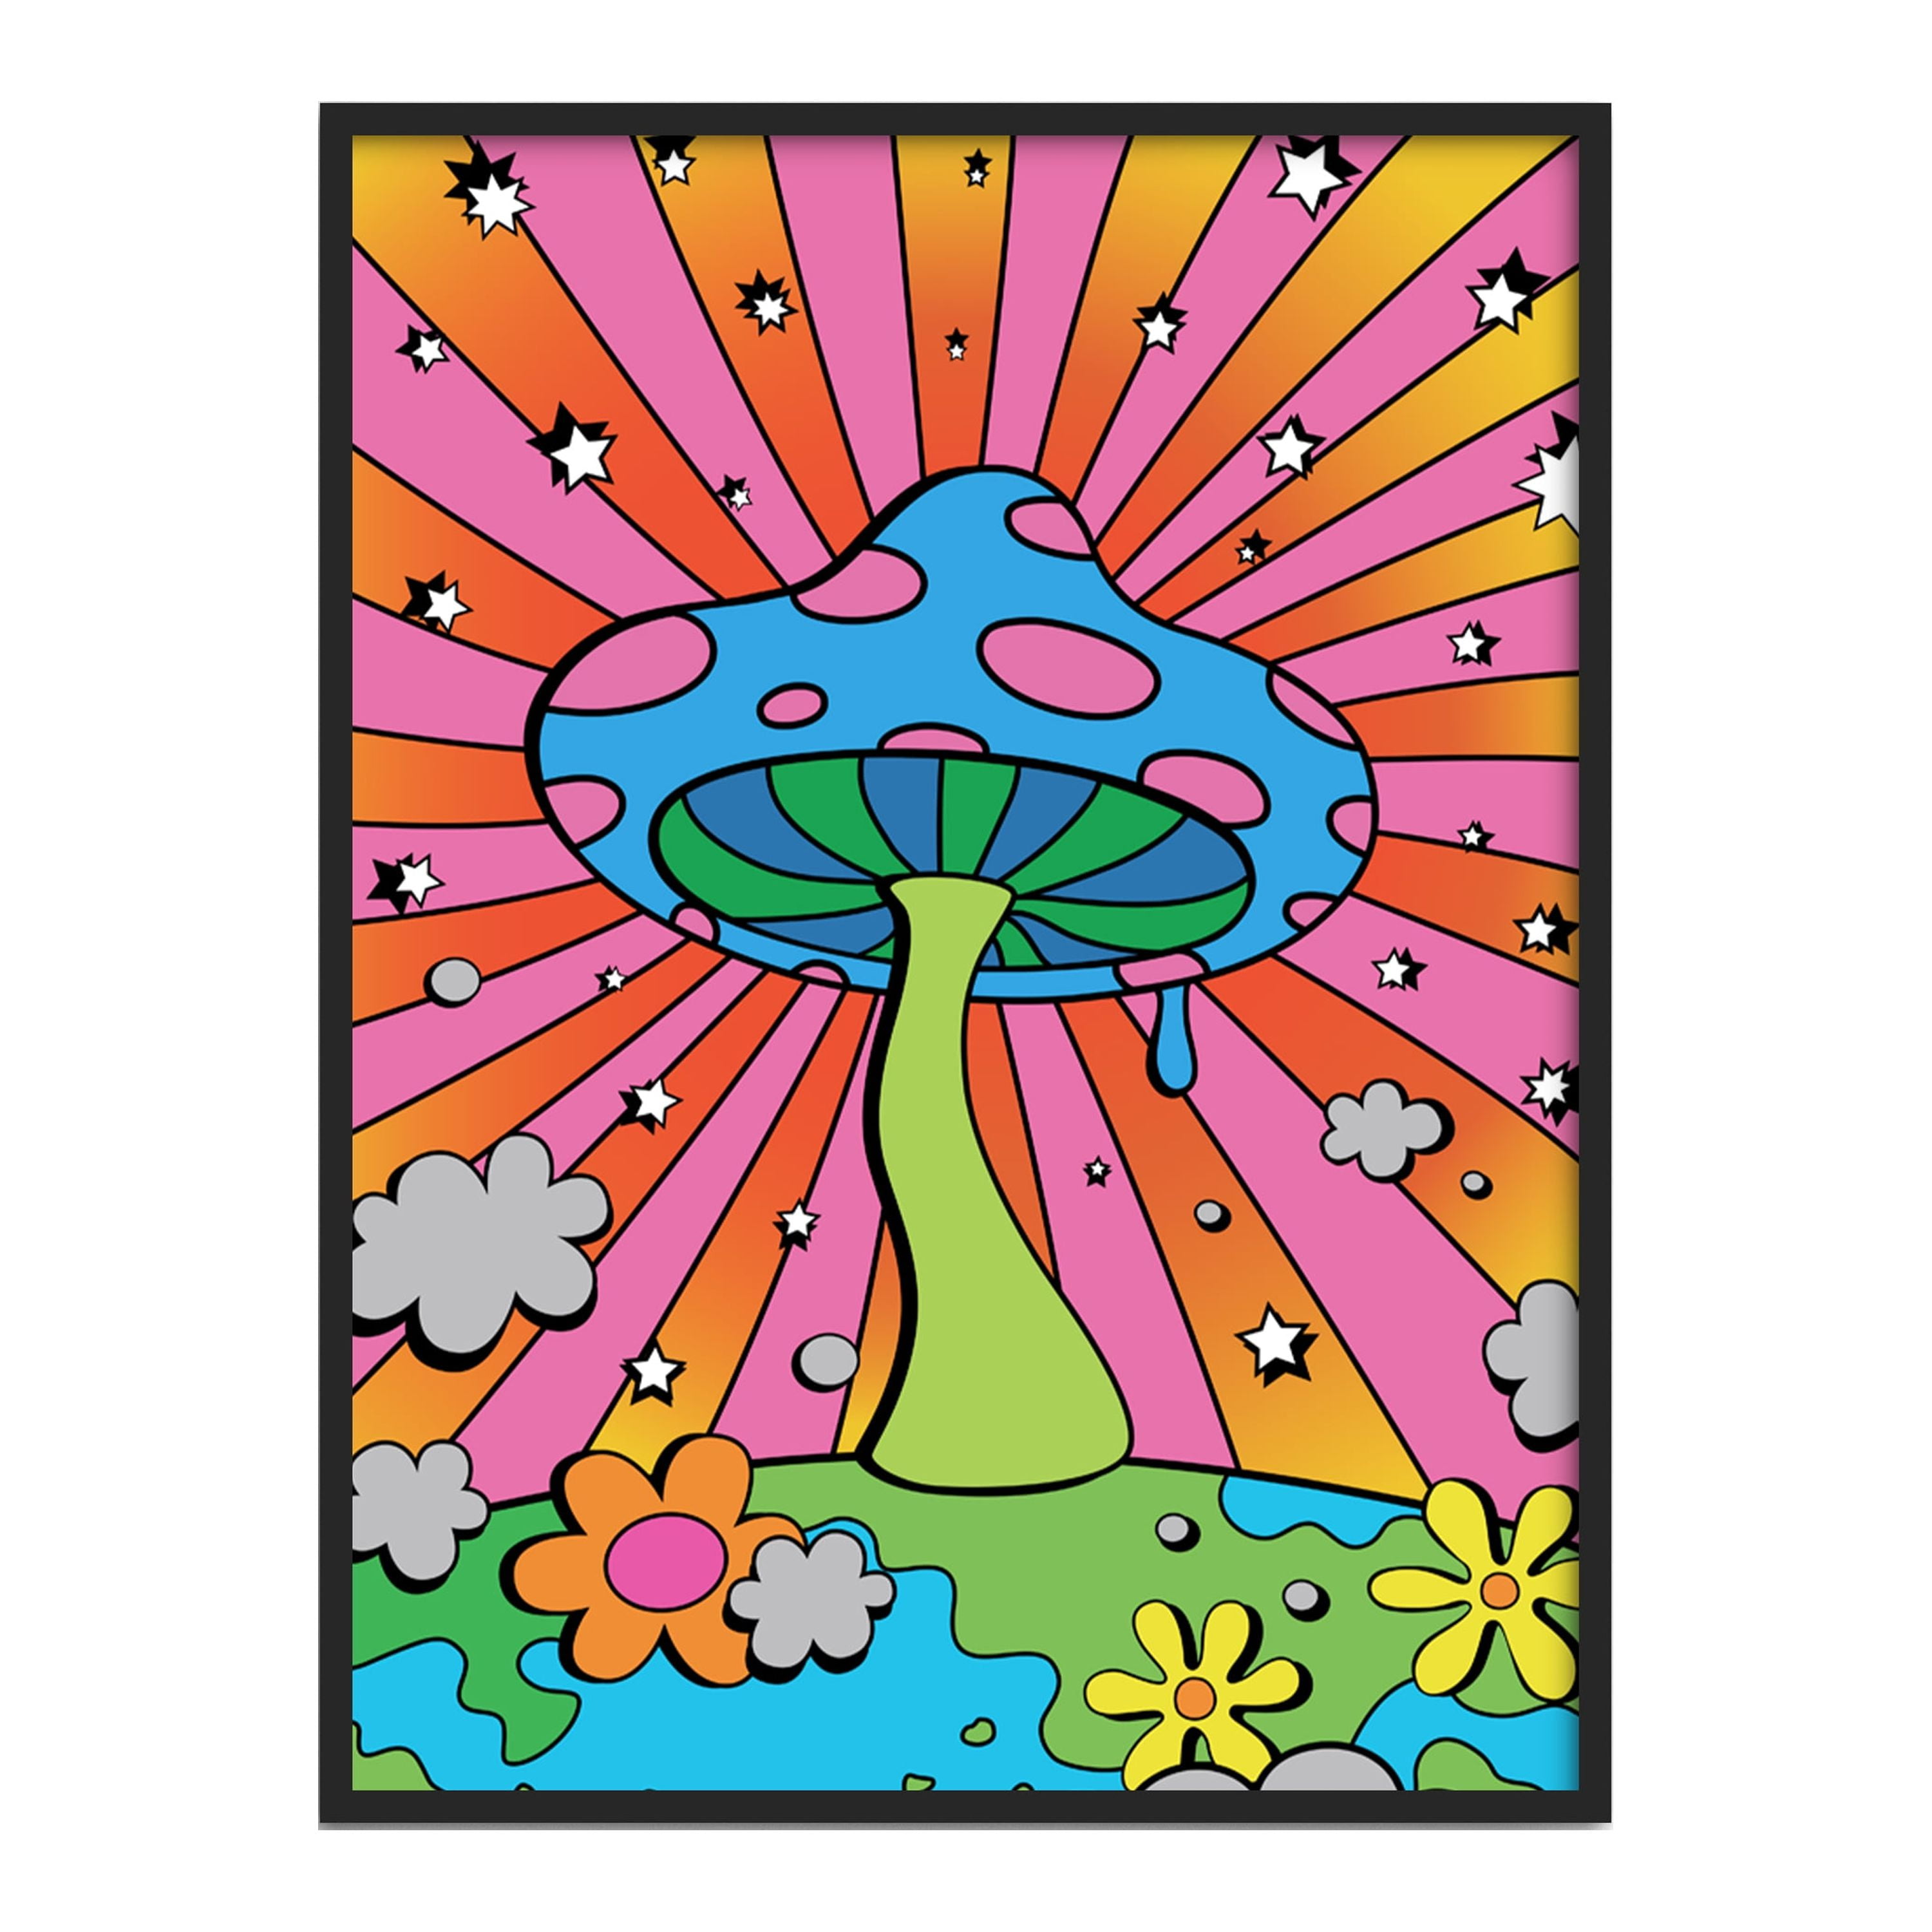 Haus and Hues Mushroom Poster Trippy Posters - Indie Posters Posters for  Room Aesthetic Hippie Posters Mushroom Art 12 x 16